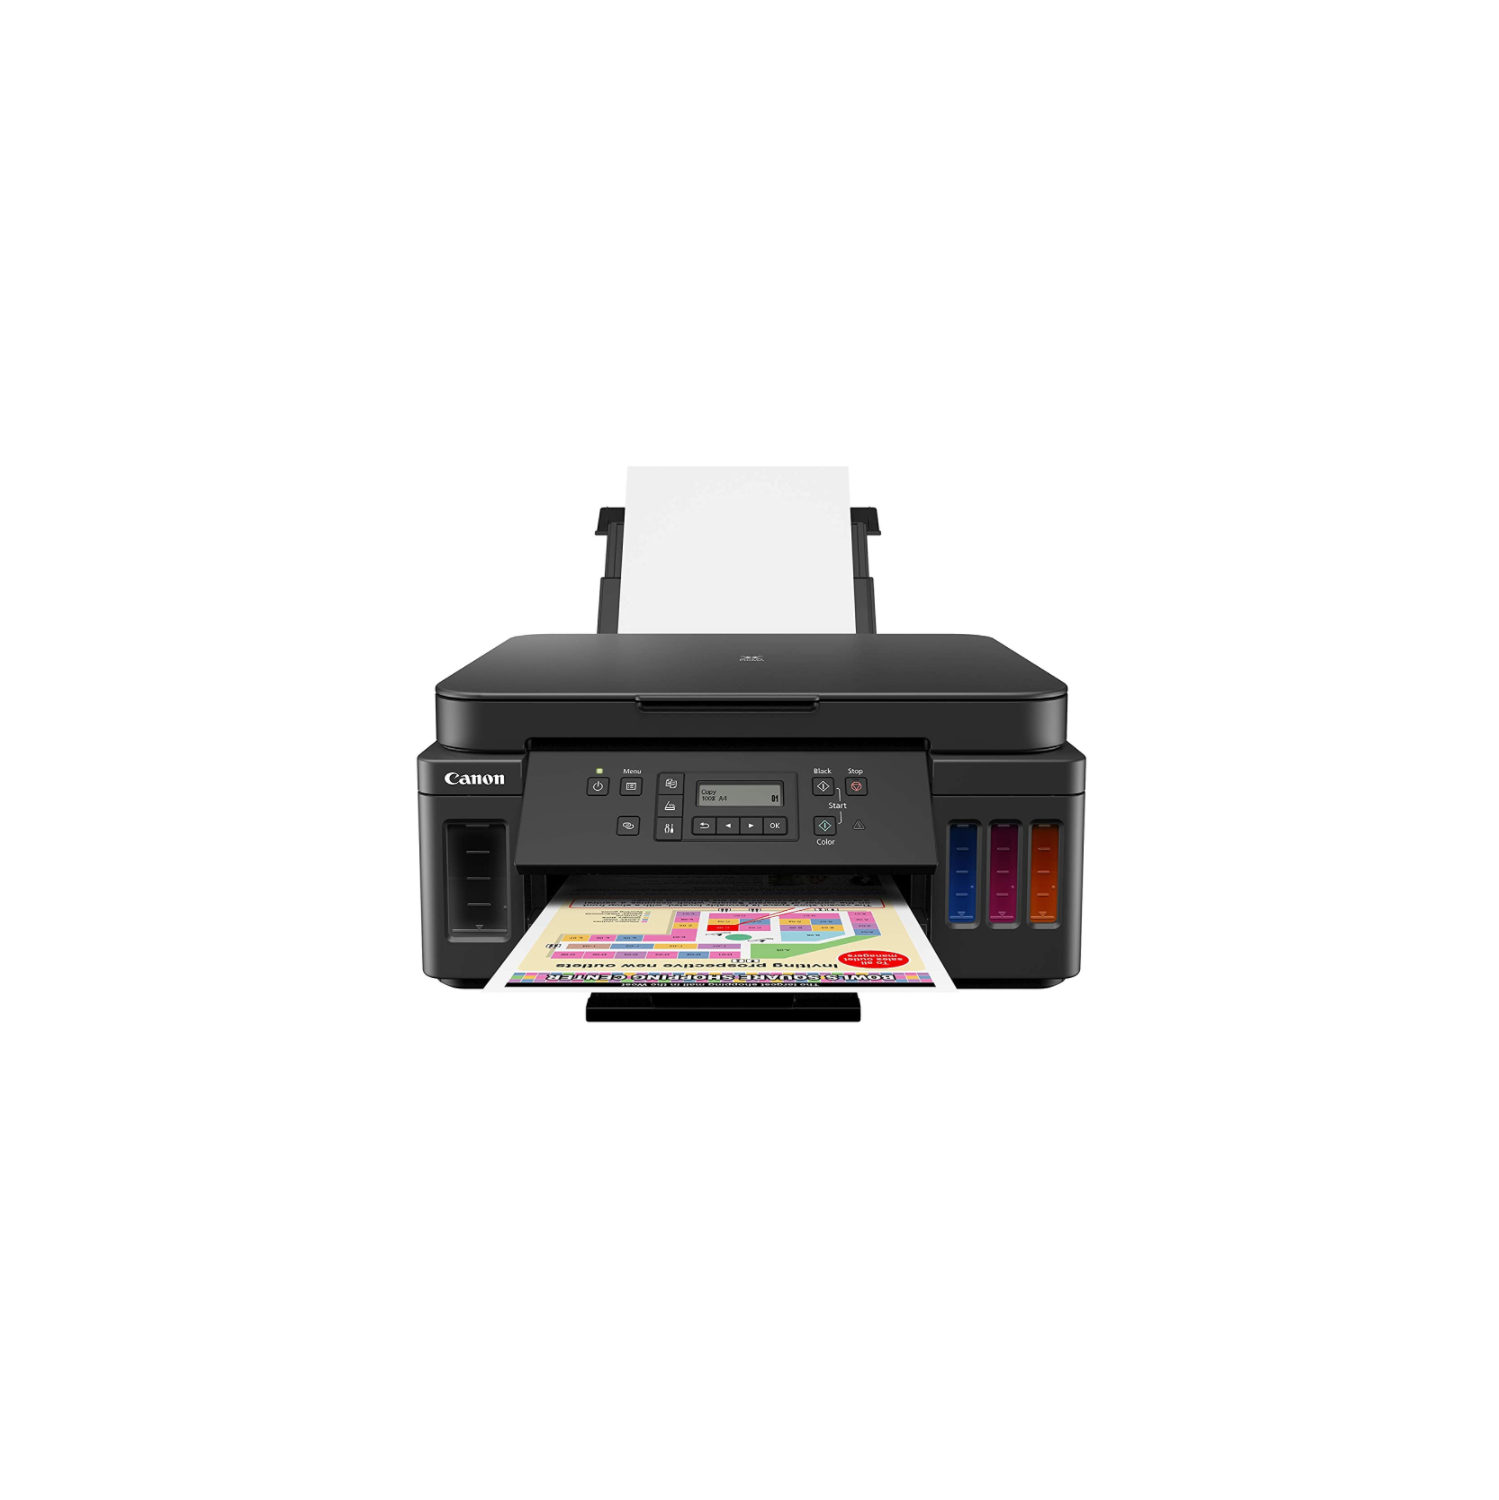 Canon PIXMA Megatank G6020 Wireless Colour Office Printer with Scanner & Copier 3113C003, Print beautiful borderless photos from 3.5" X 3.5" Square to 8.5" X 11" letter size